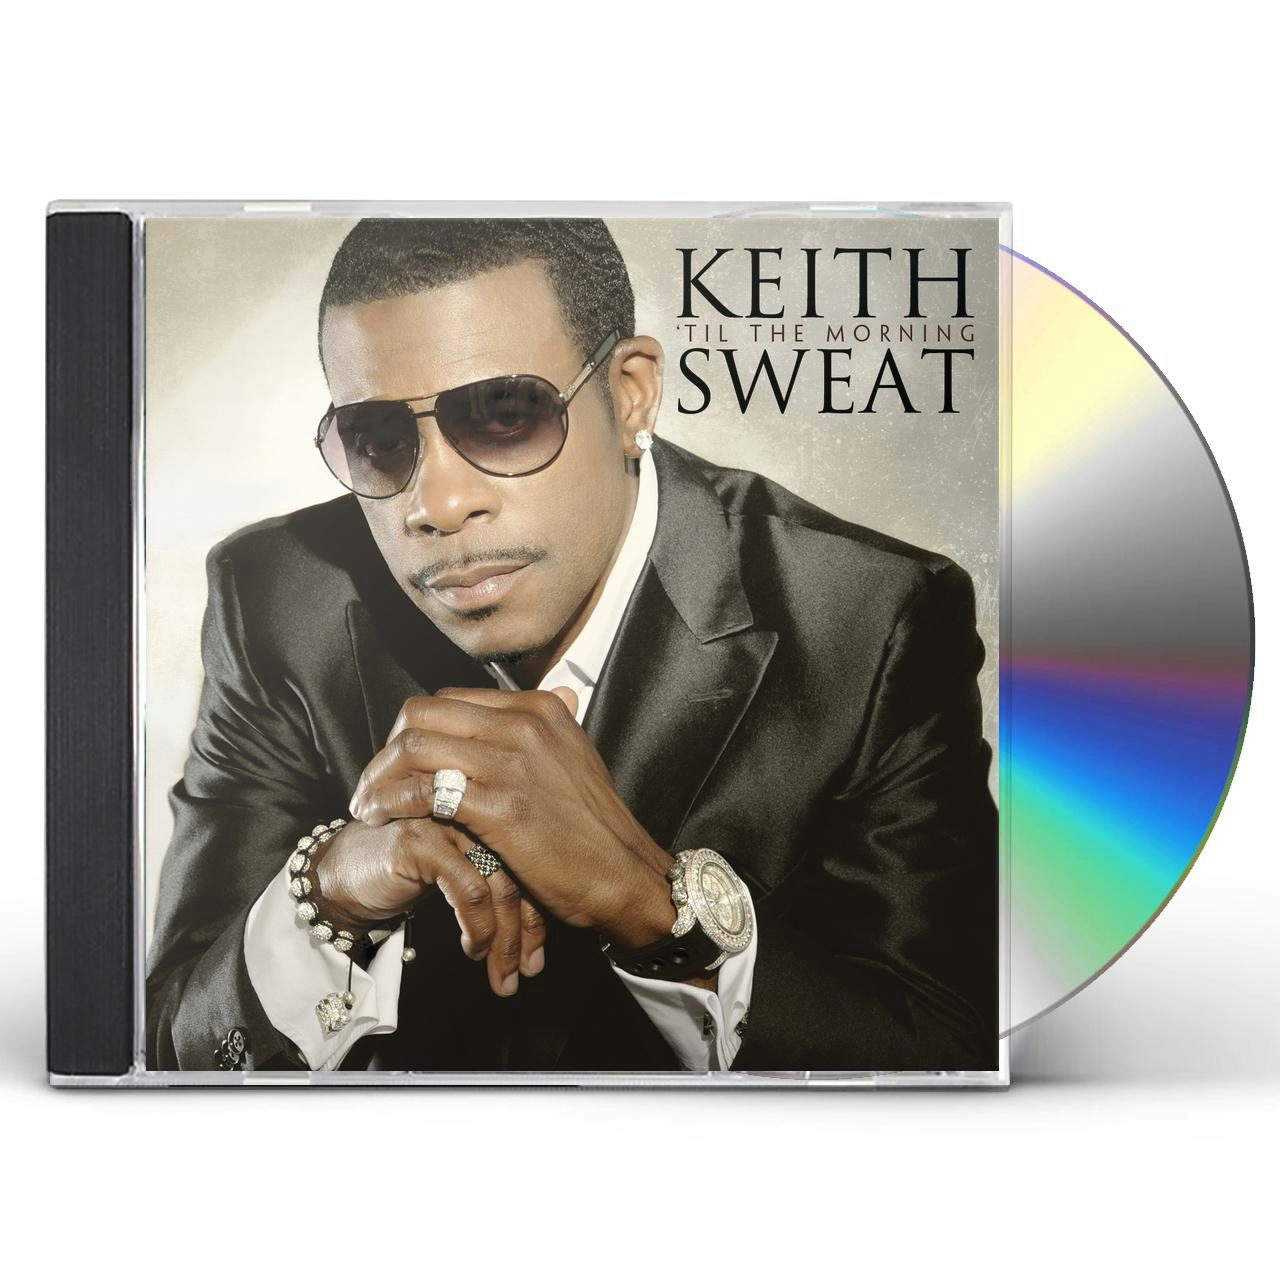 Keith Sweat TIL THE MORNING CD $17.49$15.49